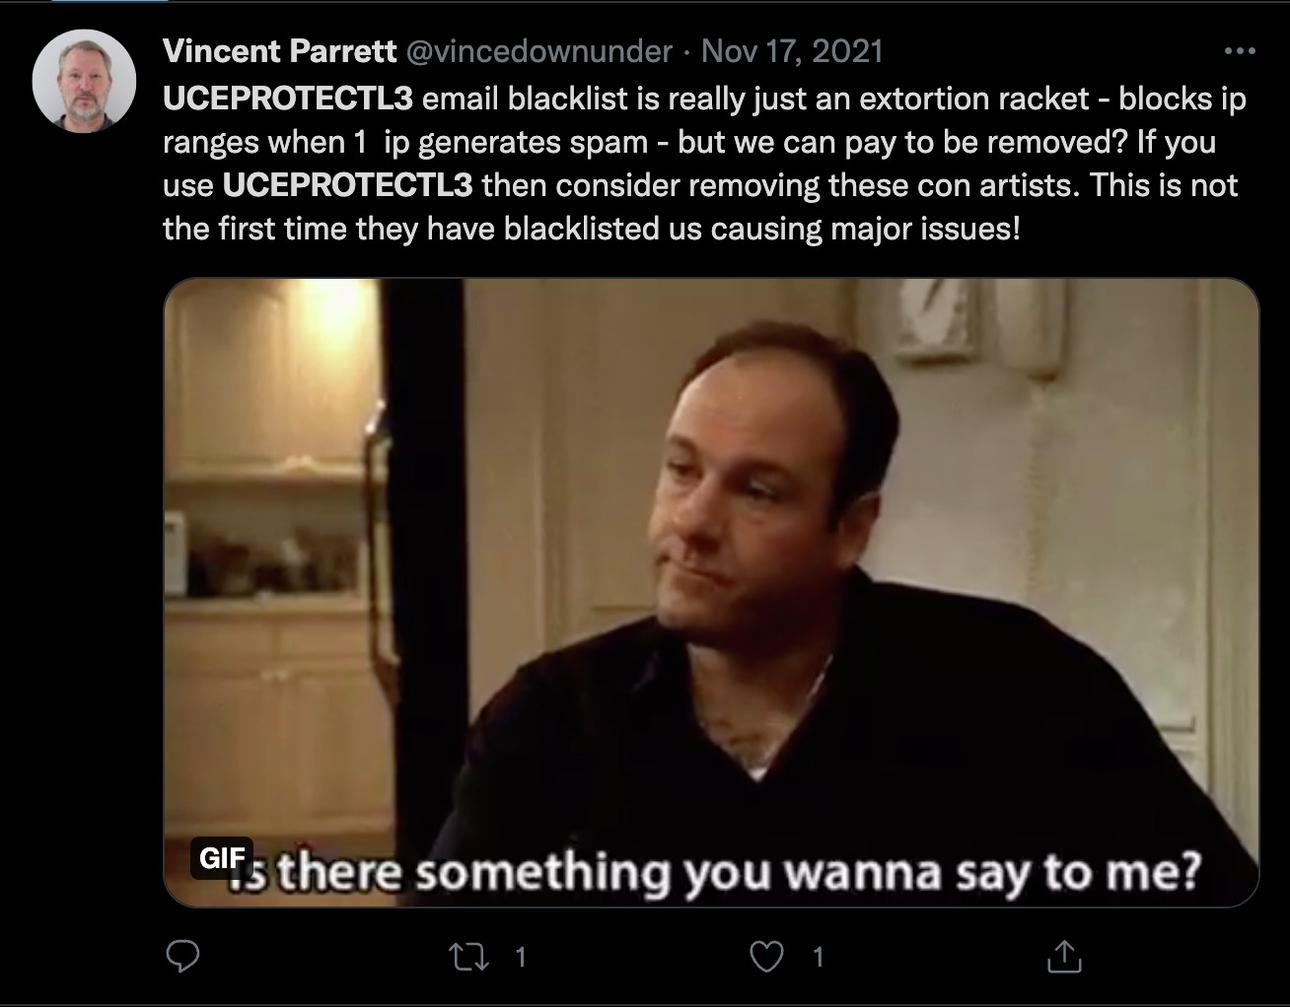 UCEPROTECT is a scam